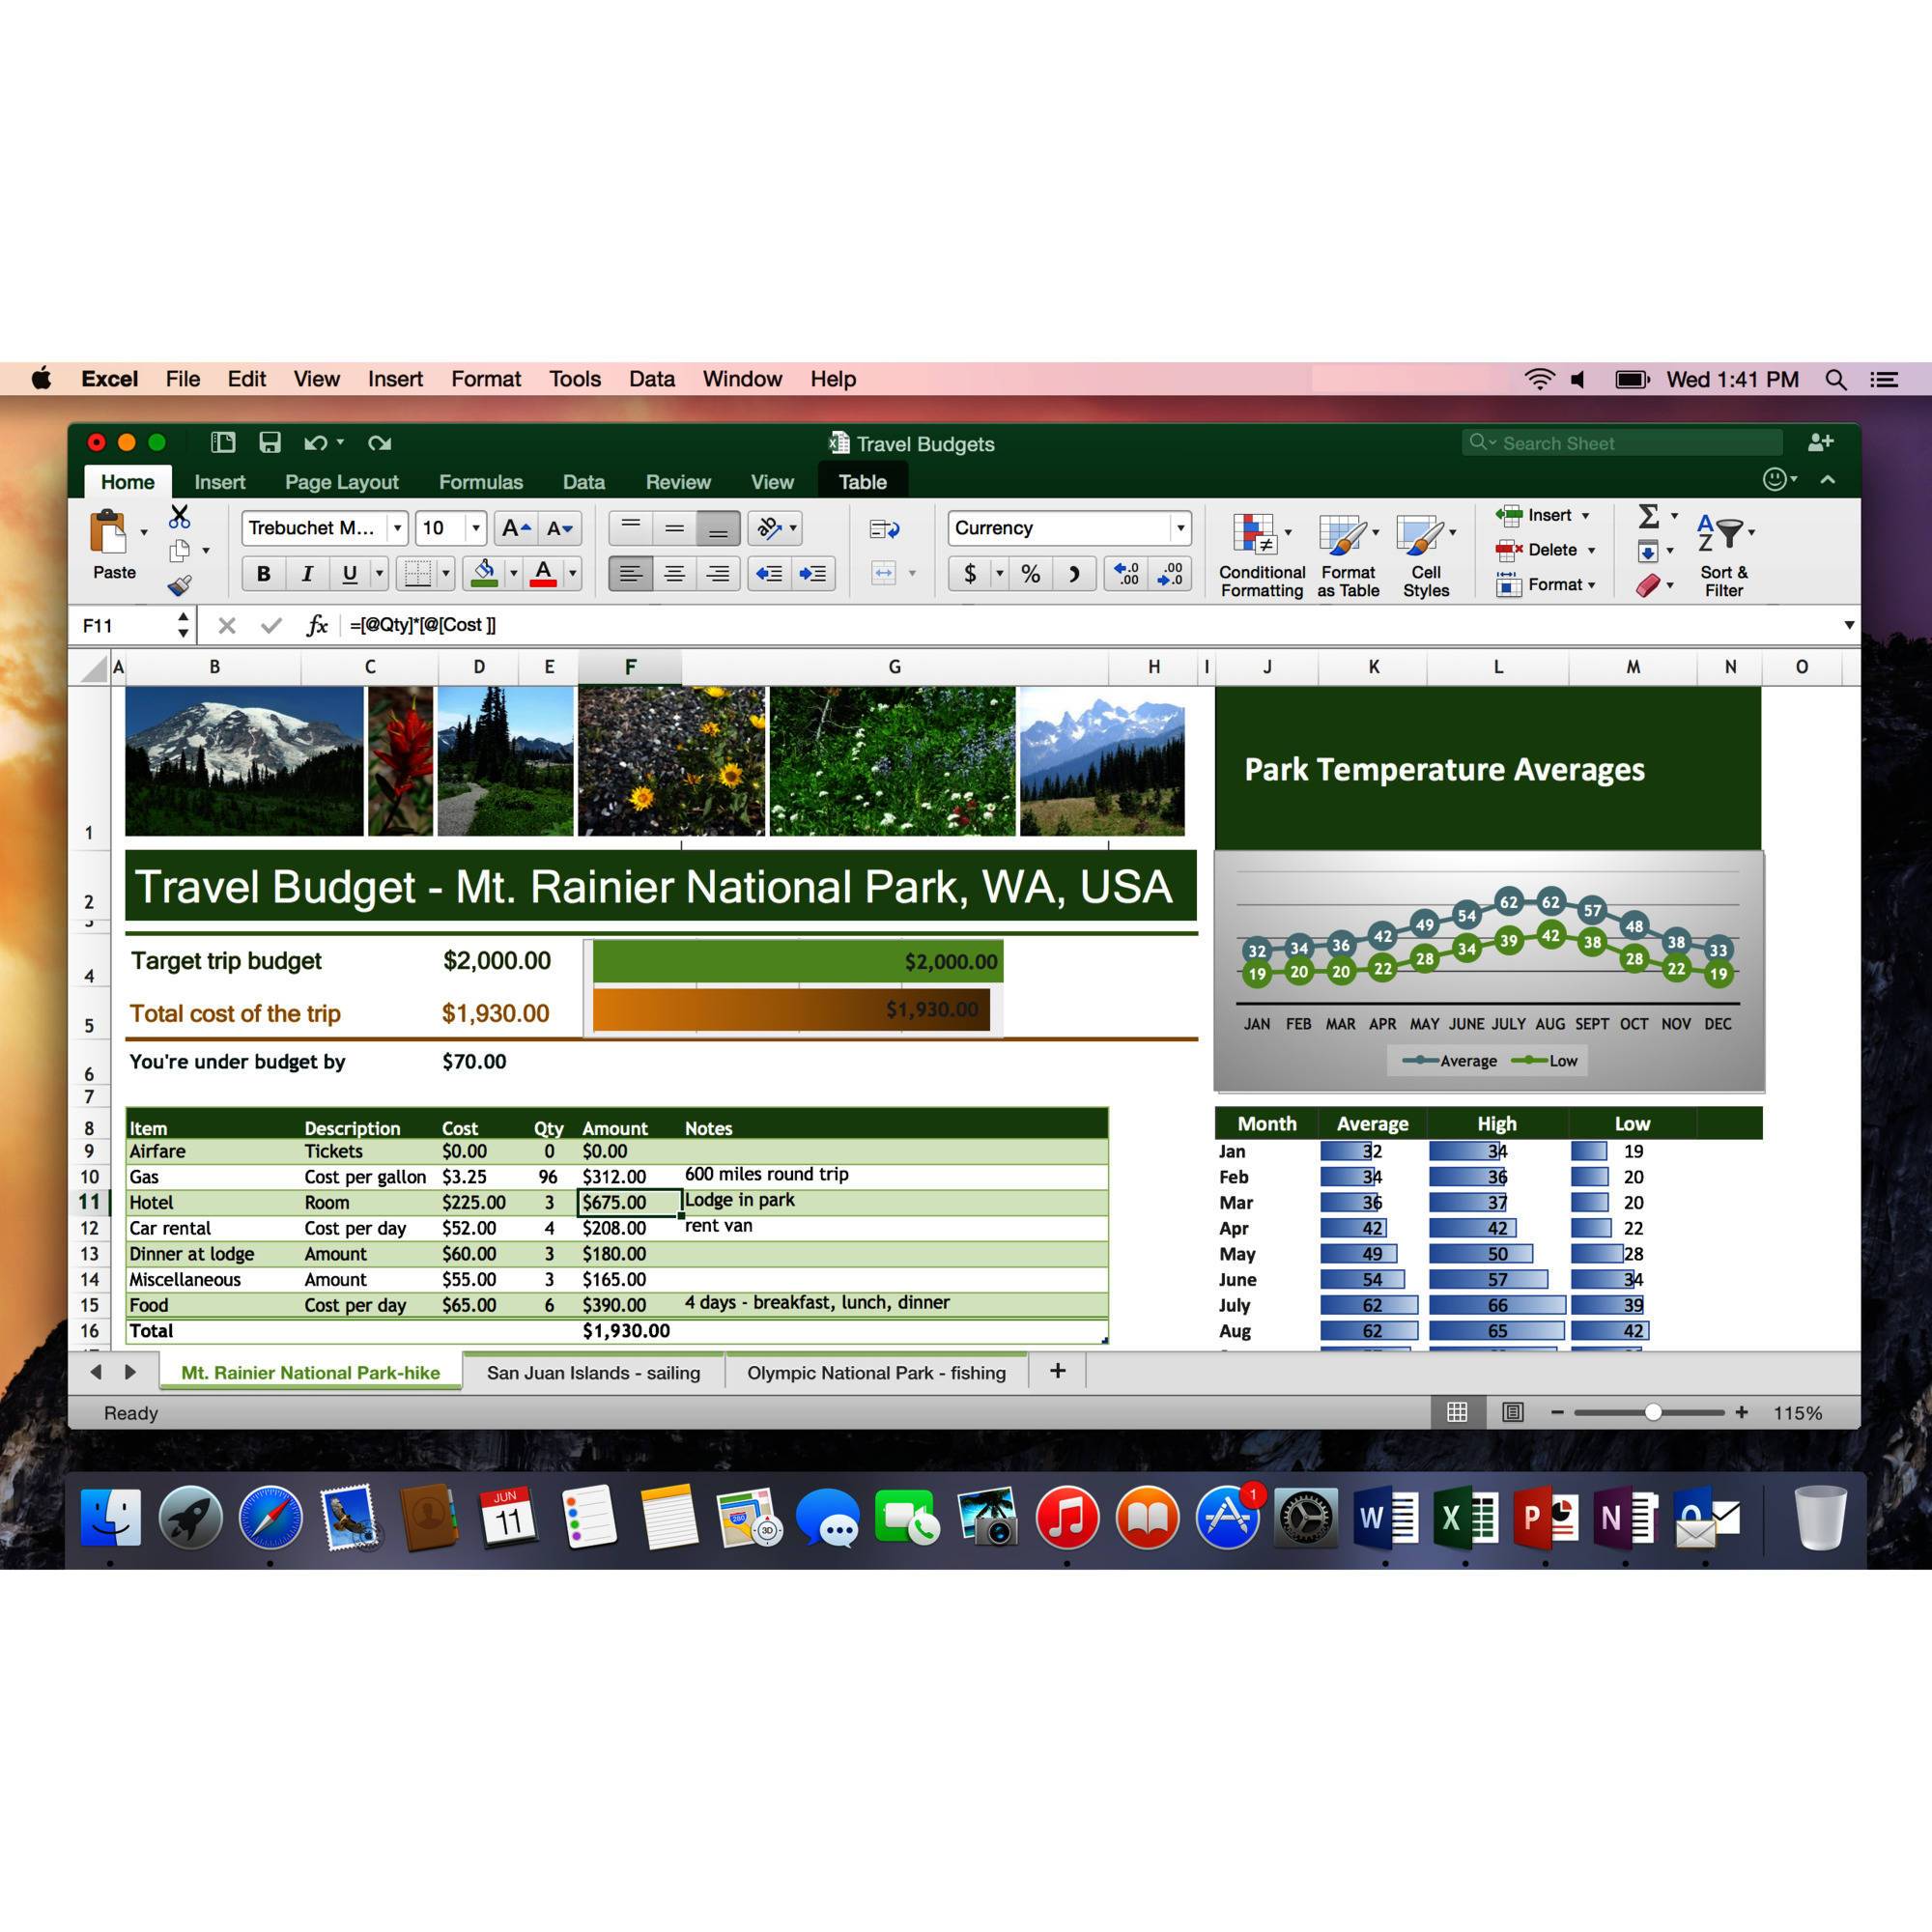 microsoft office home & student 2016